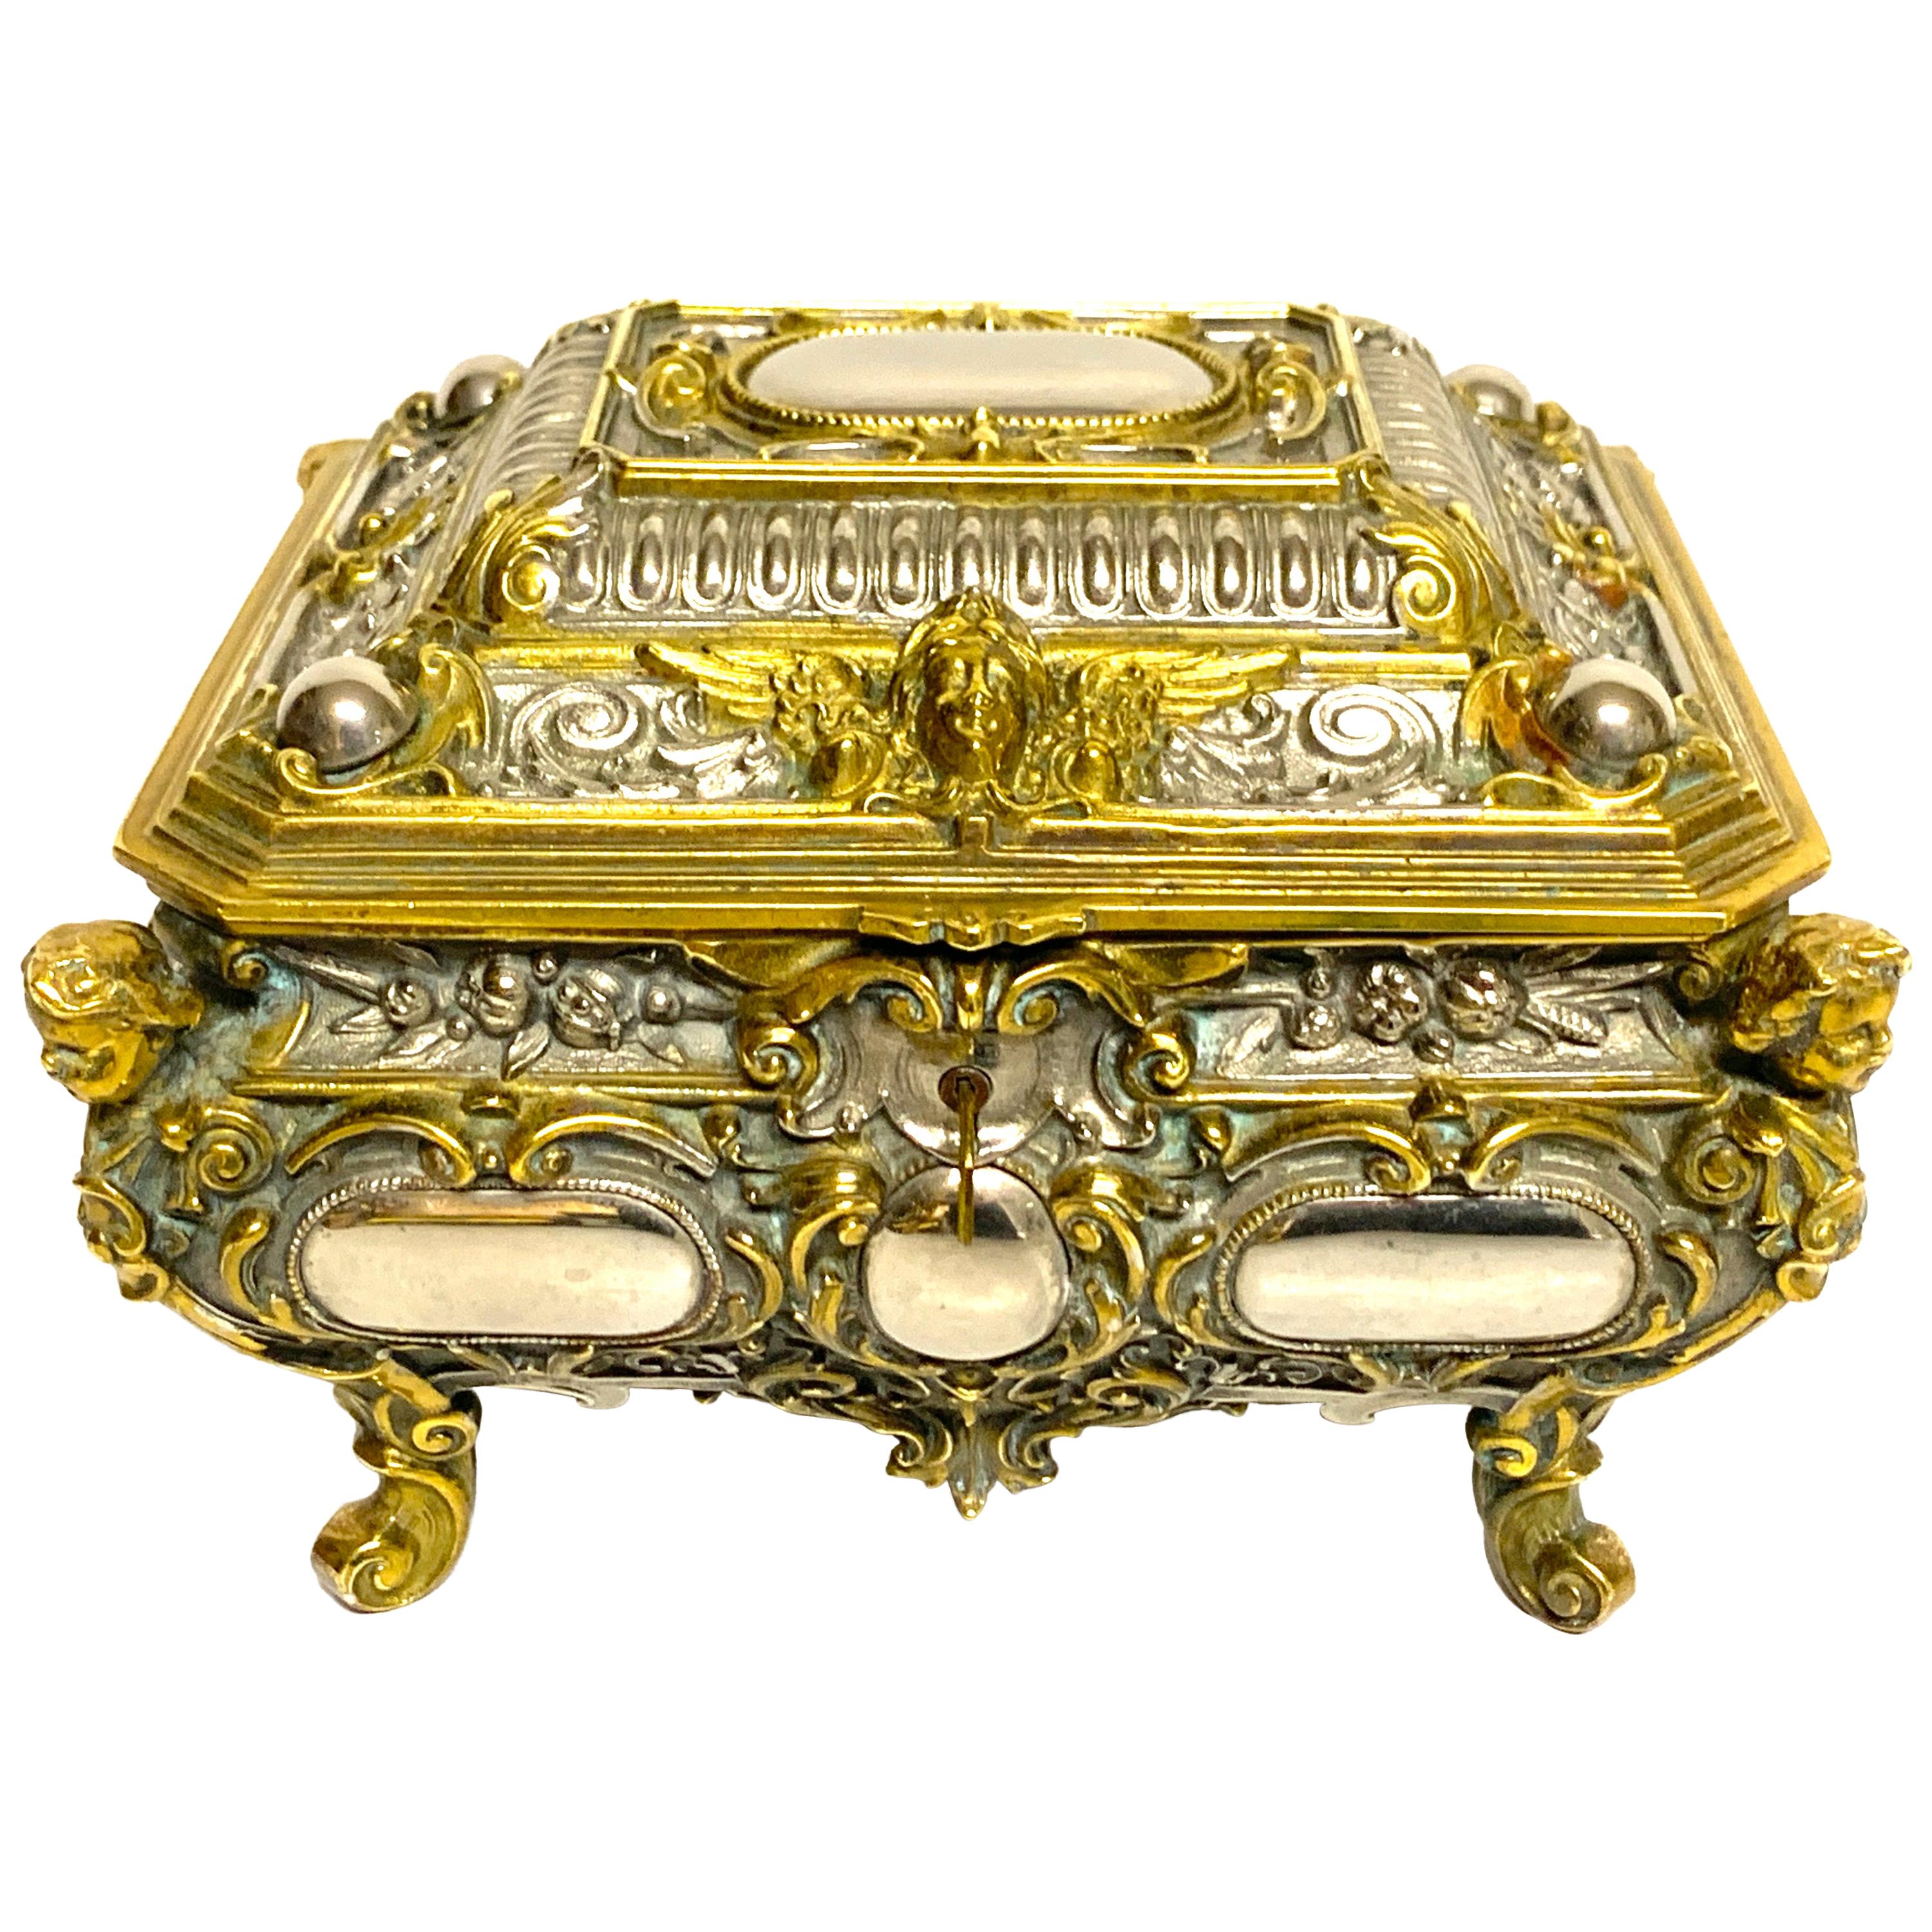 Magnificent Silvered Bronze and Ormolu Jewelry/Table Box For Sale